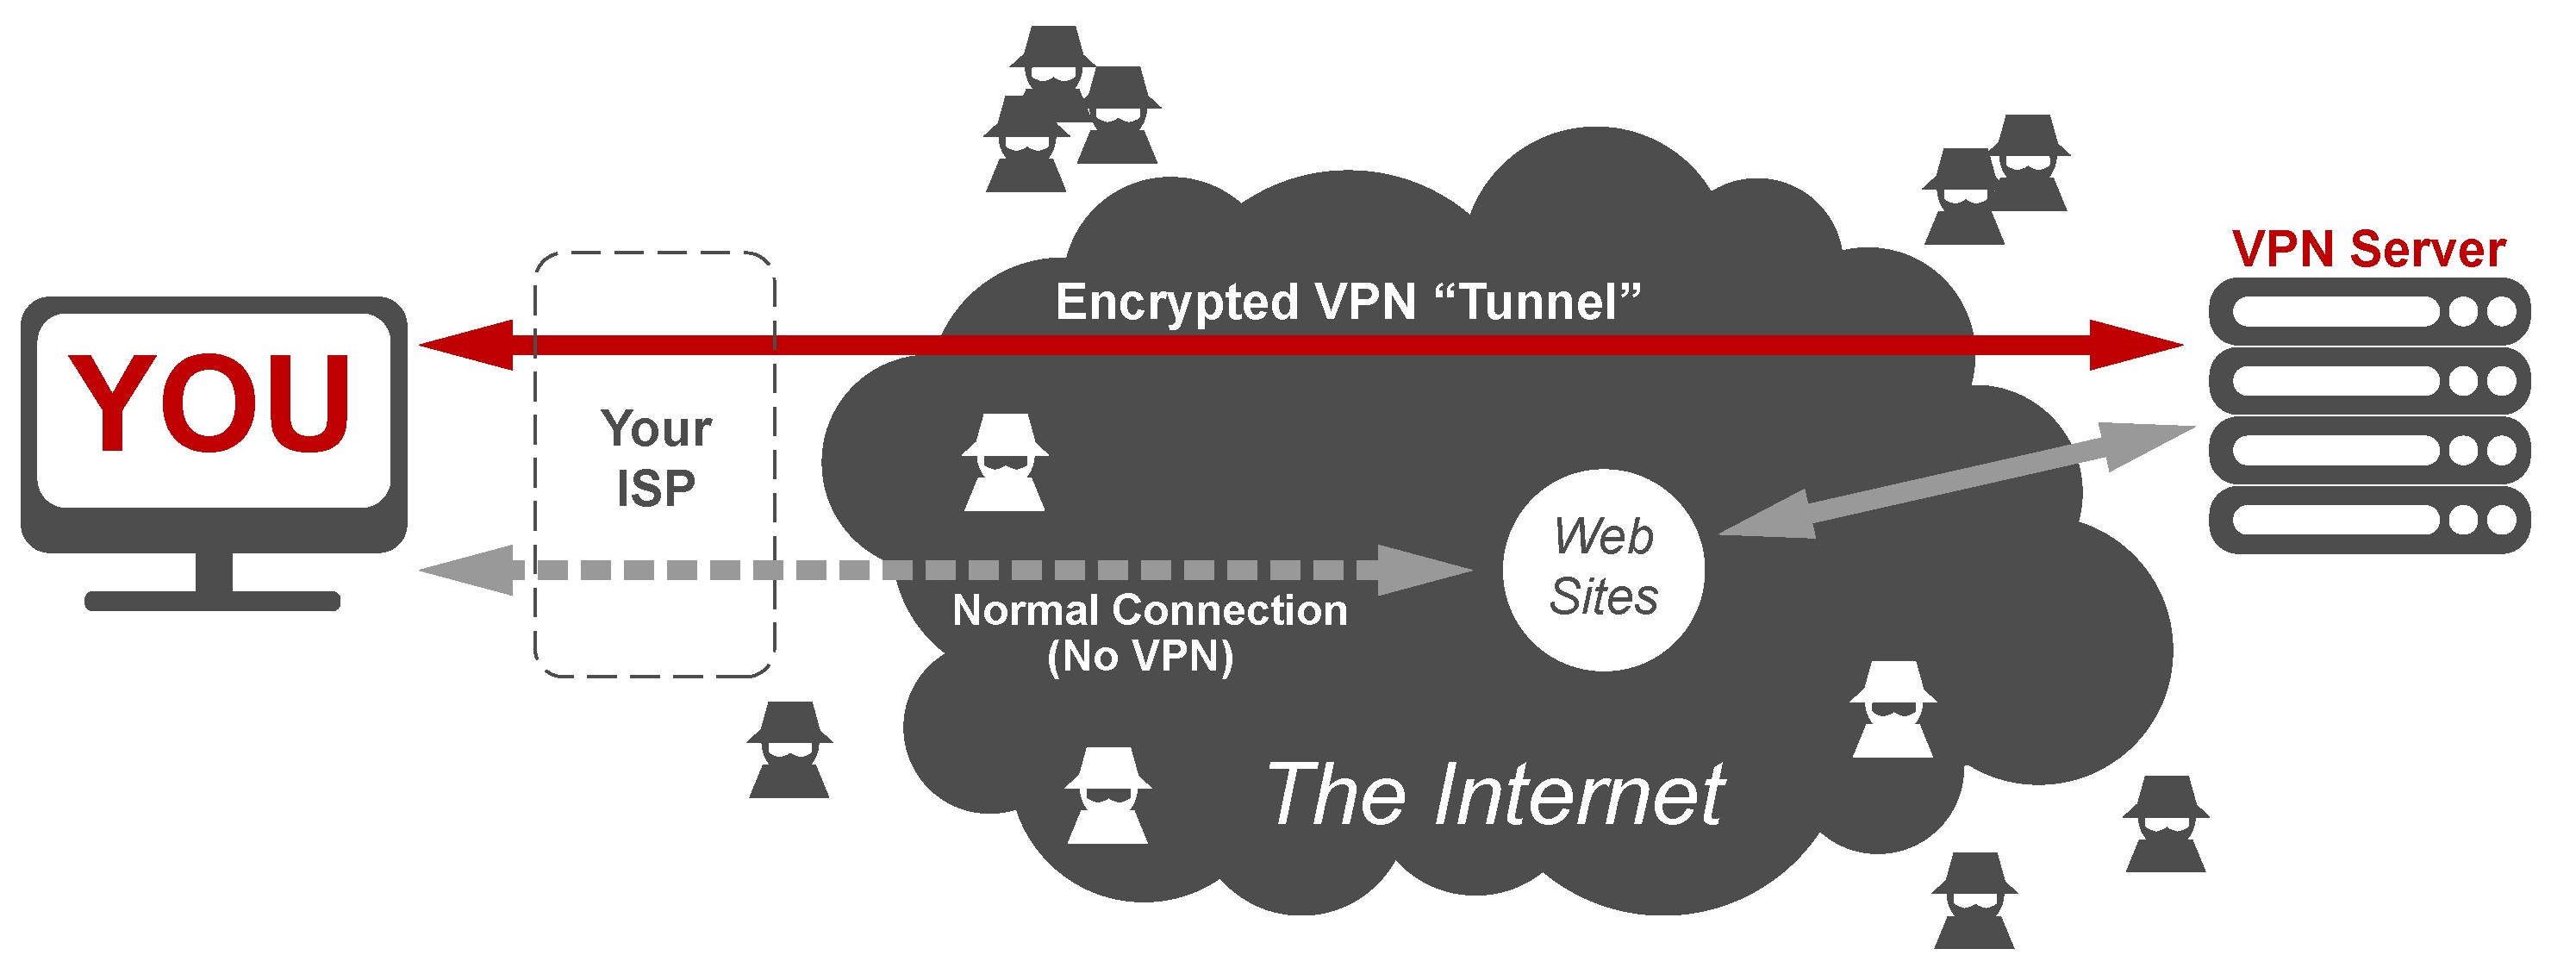 4 Things to Look In Your New VPN Service, Crucial Points To know!